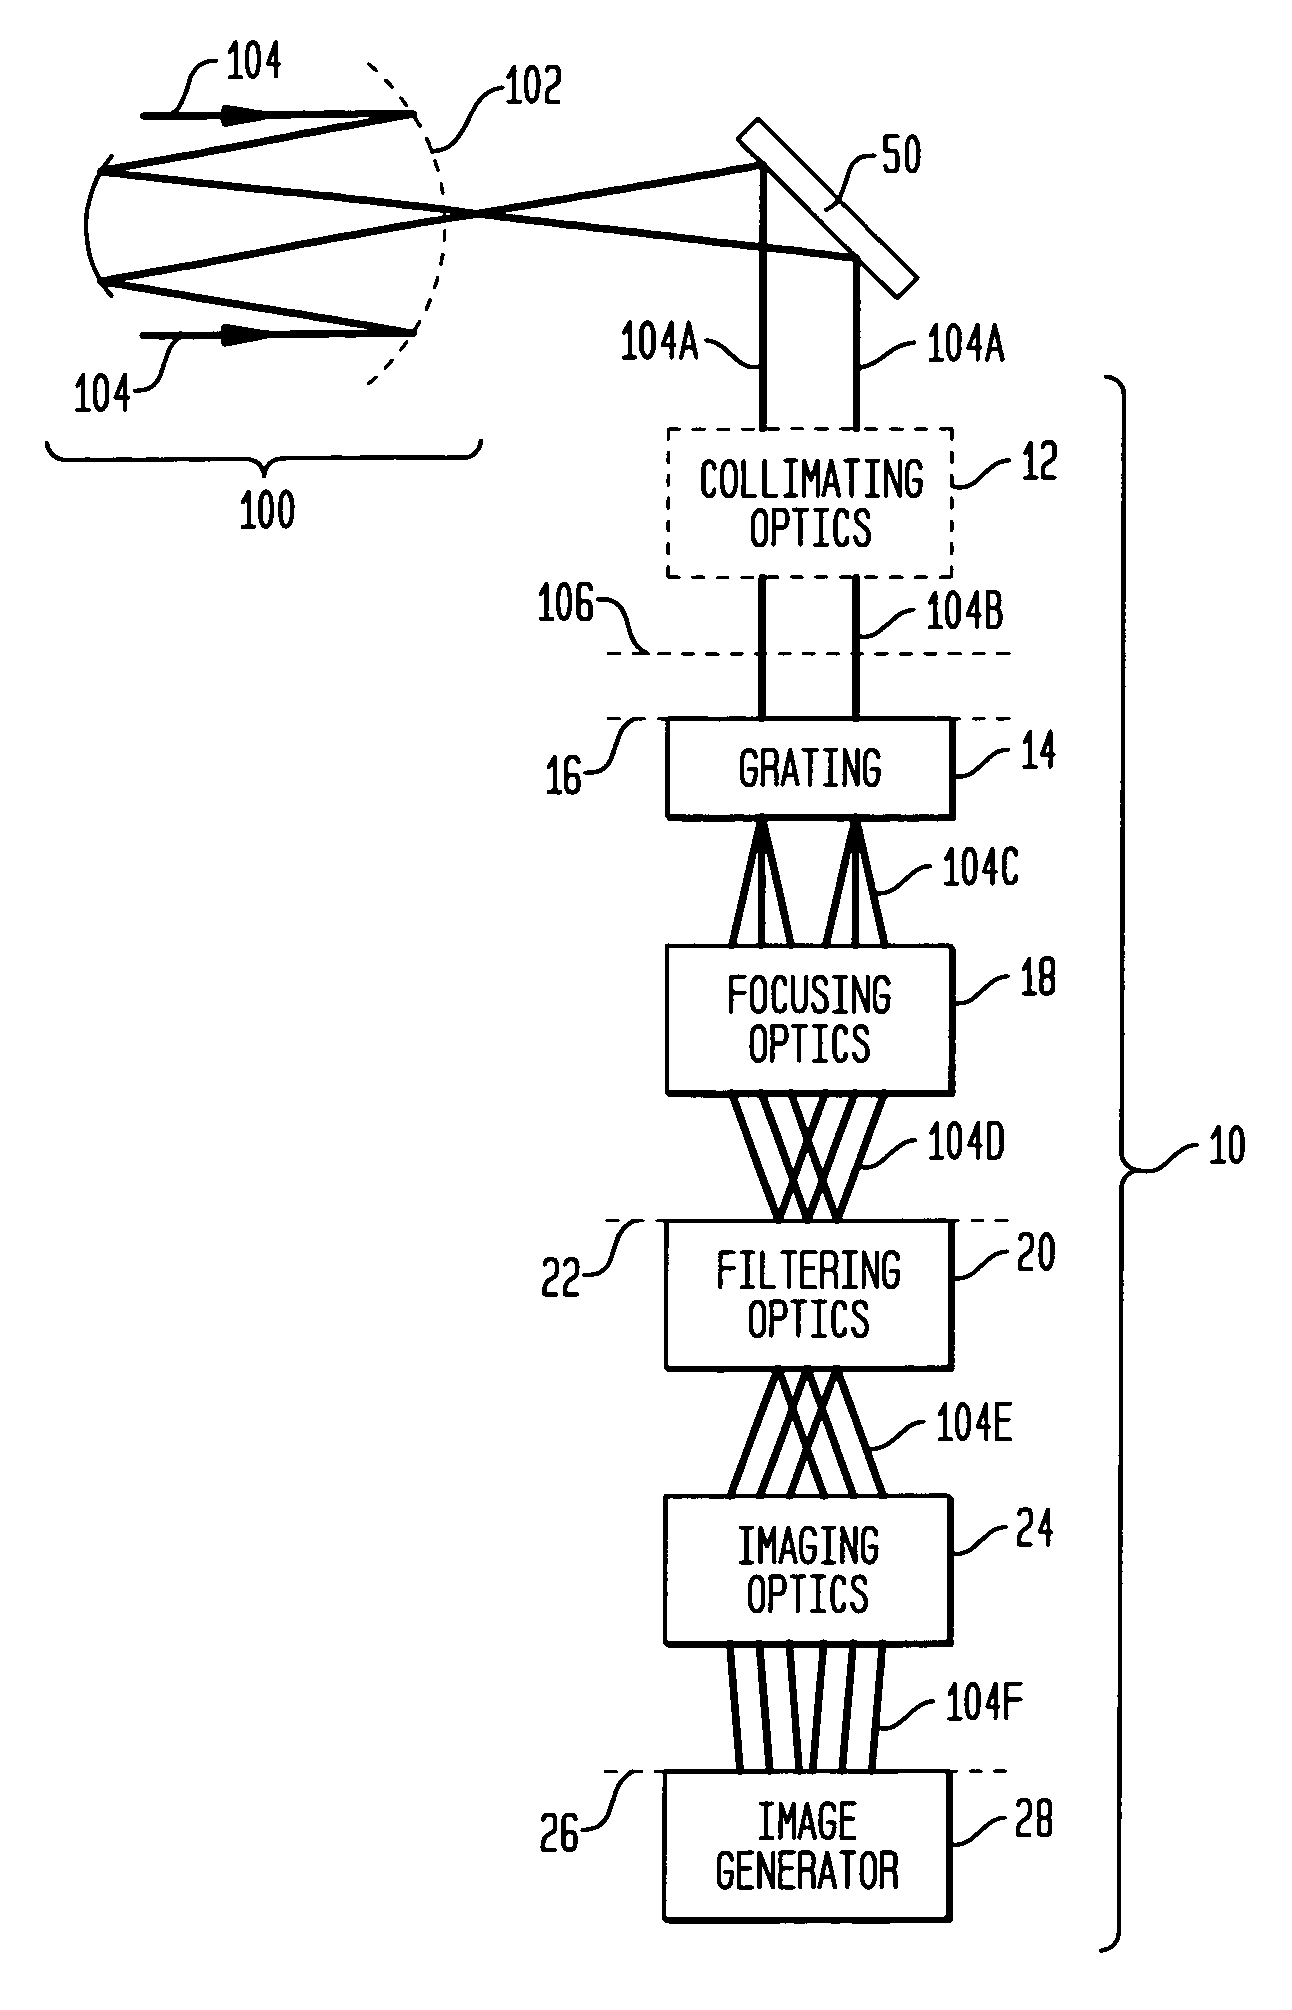 Achromatic shearing phase sensor for generating images indicative of measure(s) of alignment between segments of a segmented telescope's mirrors